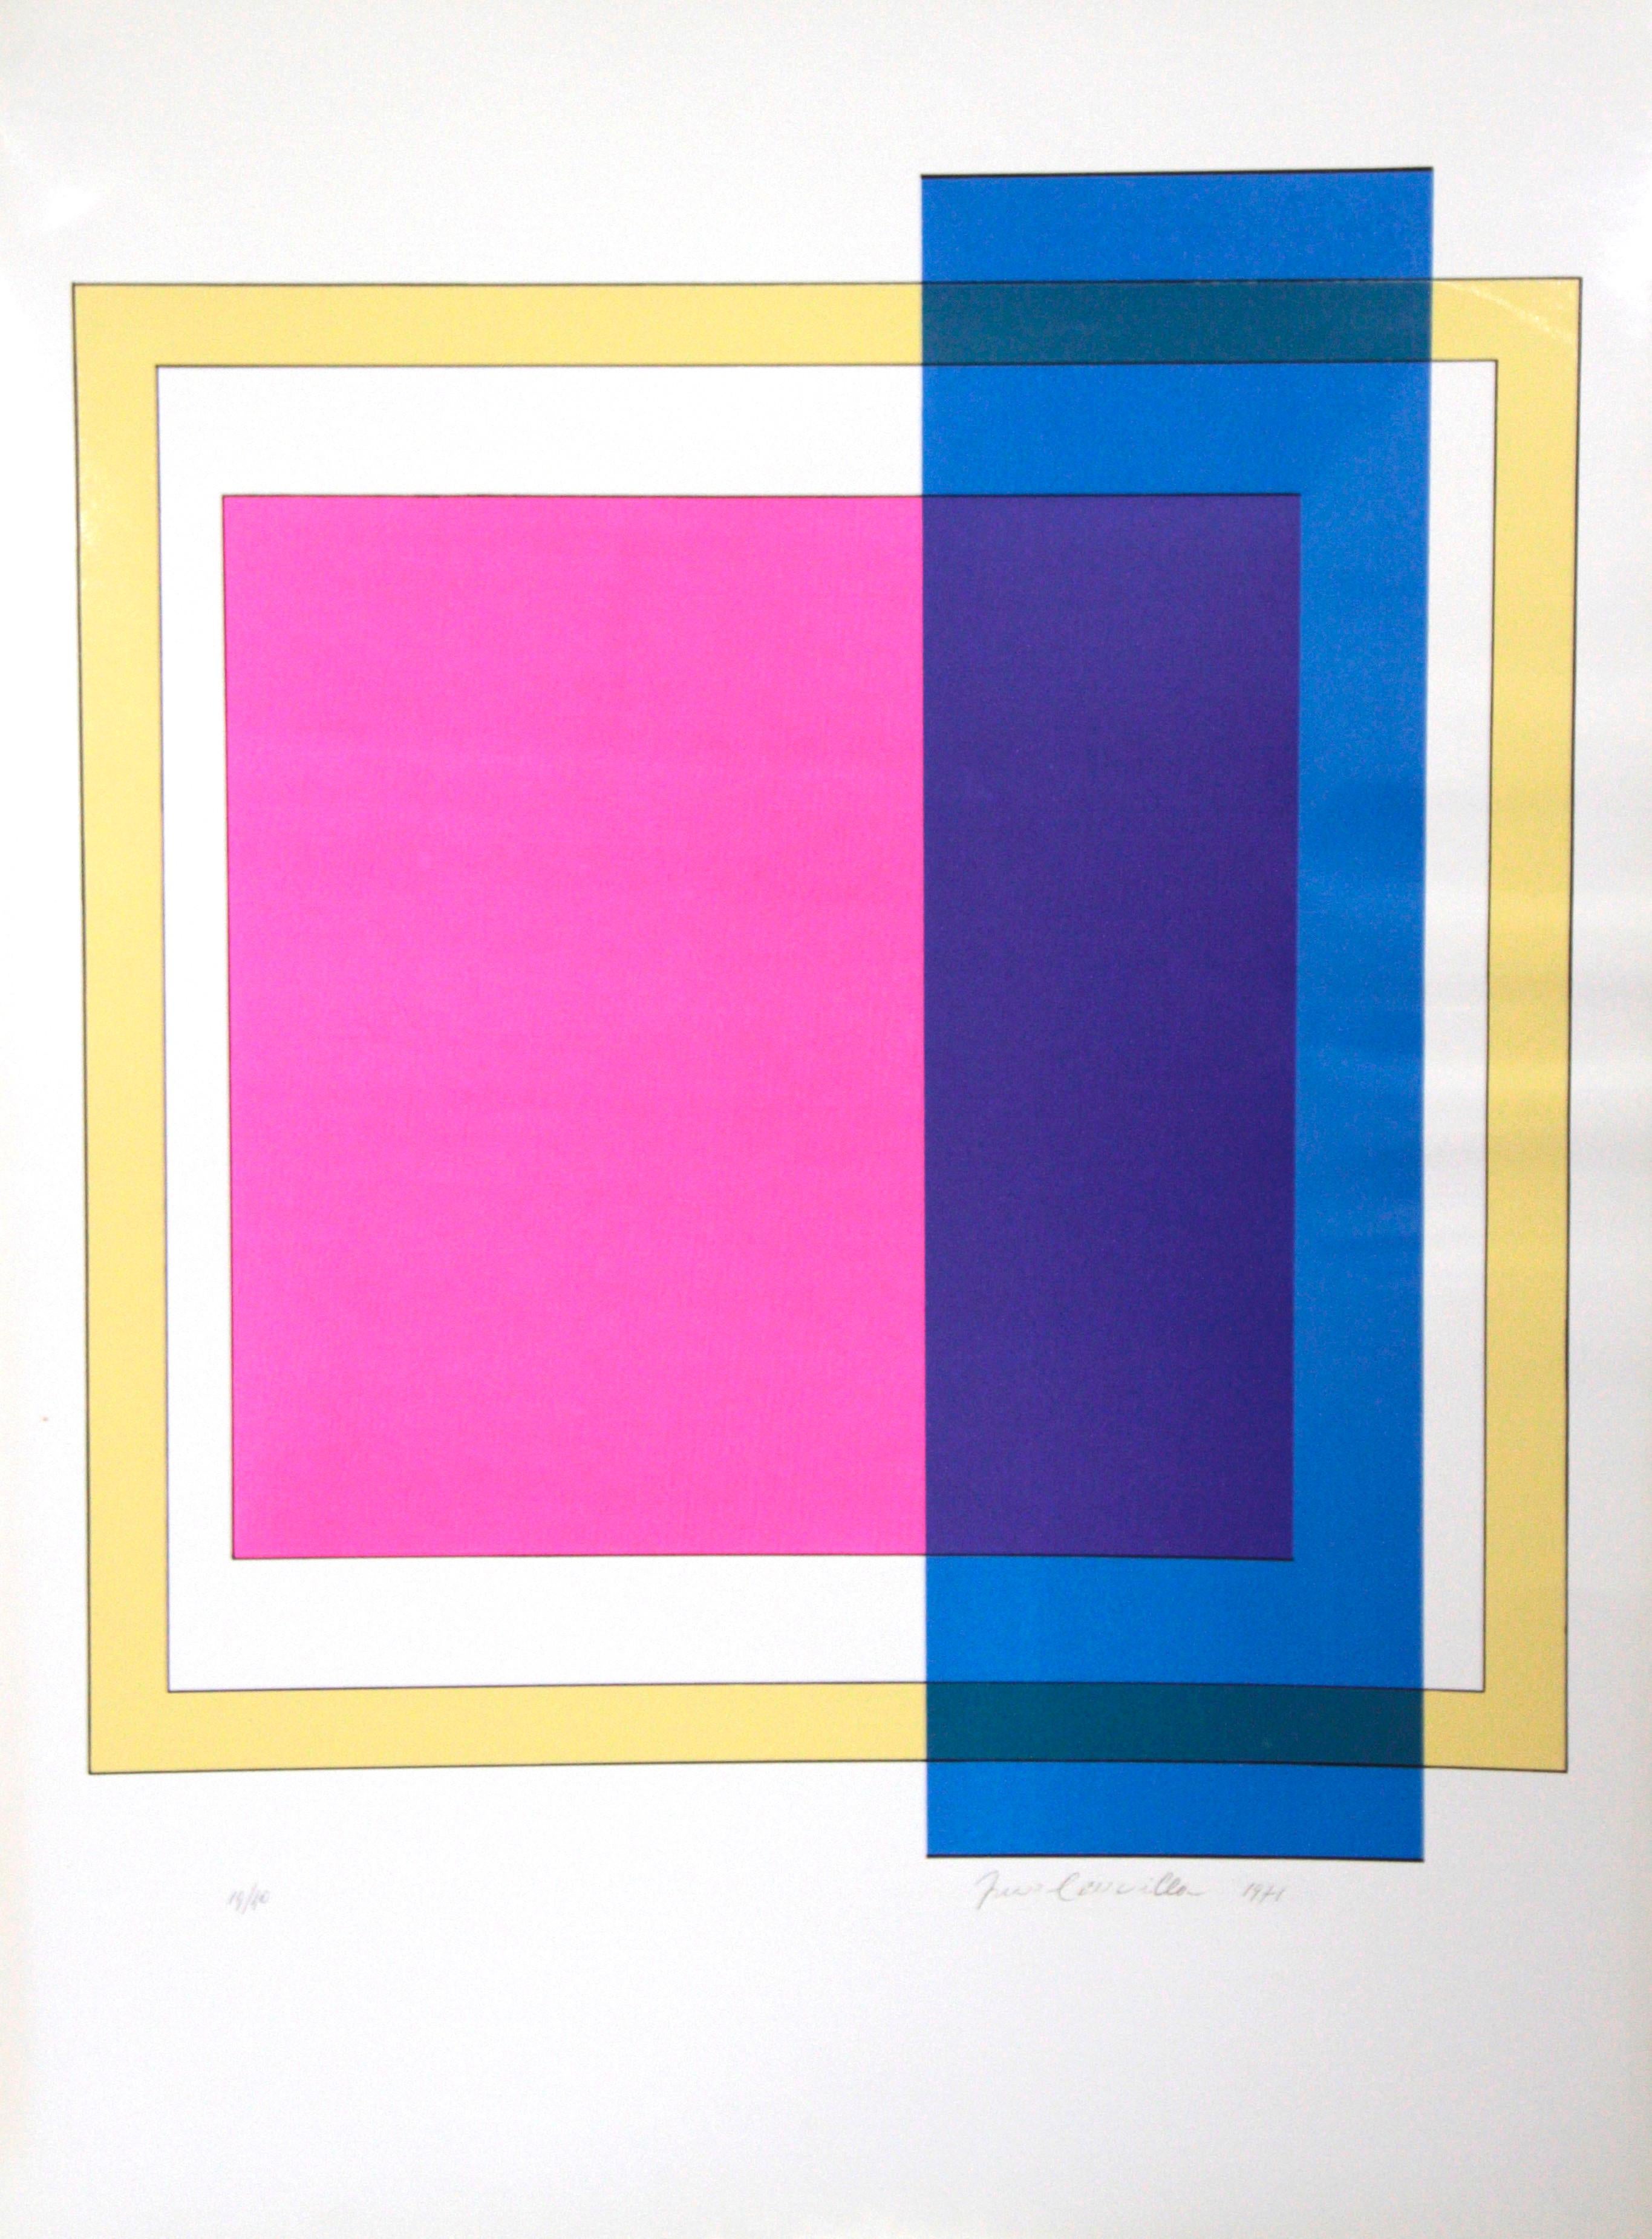 Composition X is an original serigraph realized by Franco Cannilla in 1971.

The artwork is hand-signed in pen by the artist. Edition of 50 prints.

The serigraph is from the print suite "Structures", a rare portfolio realized by Cannilla in the